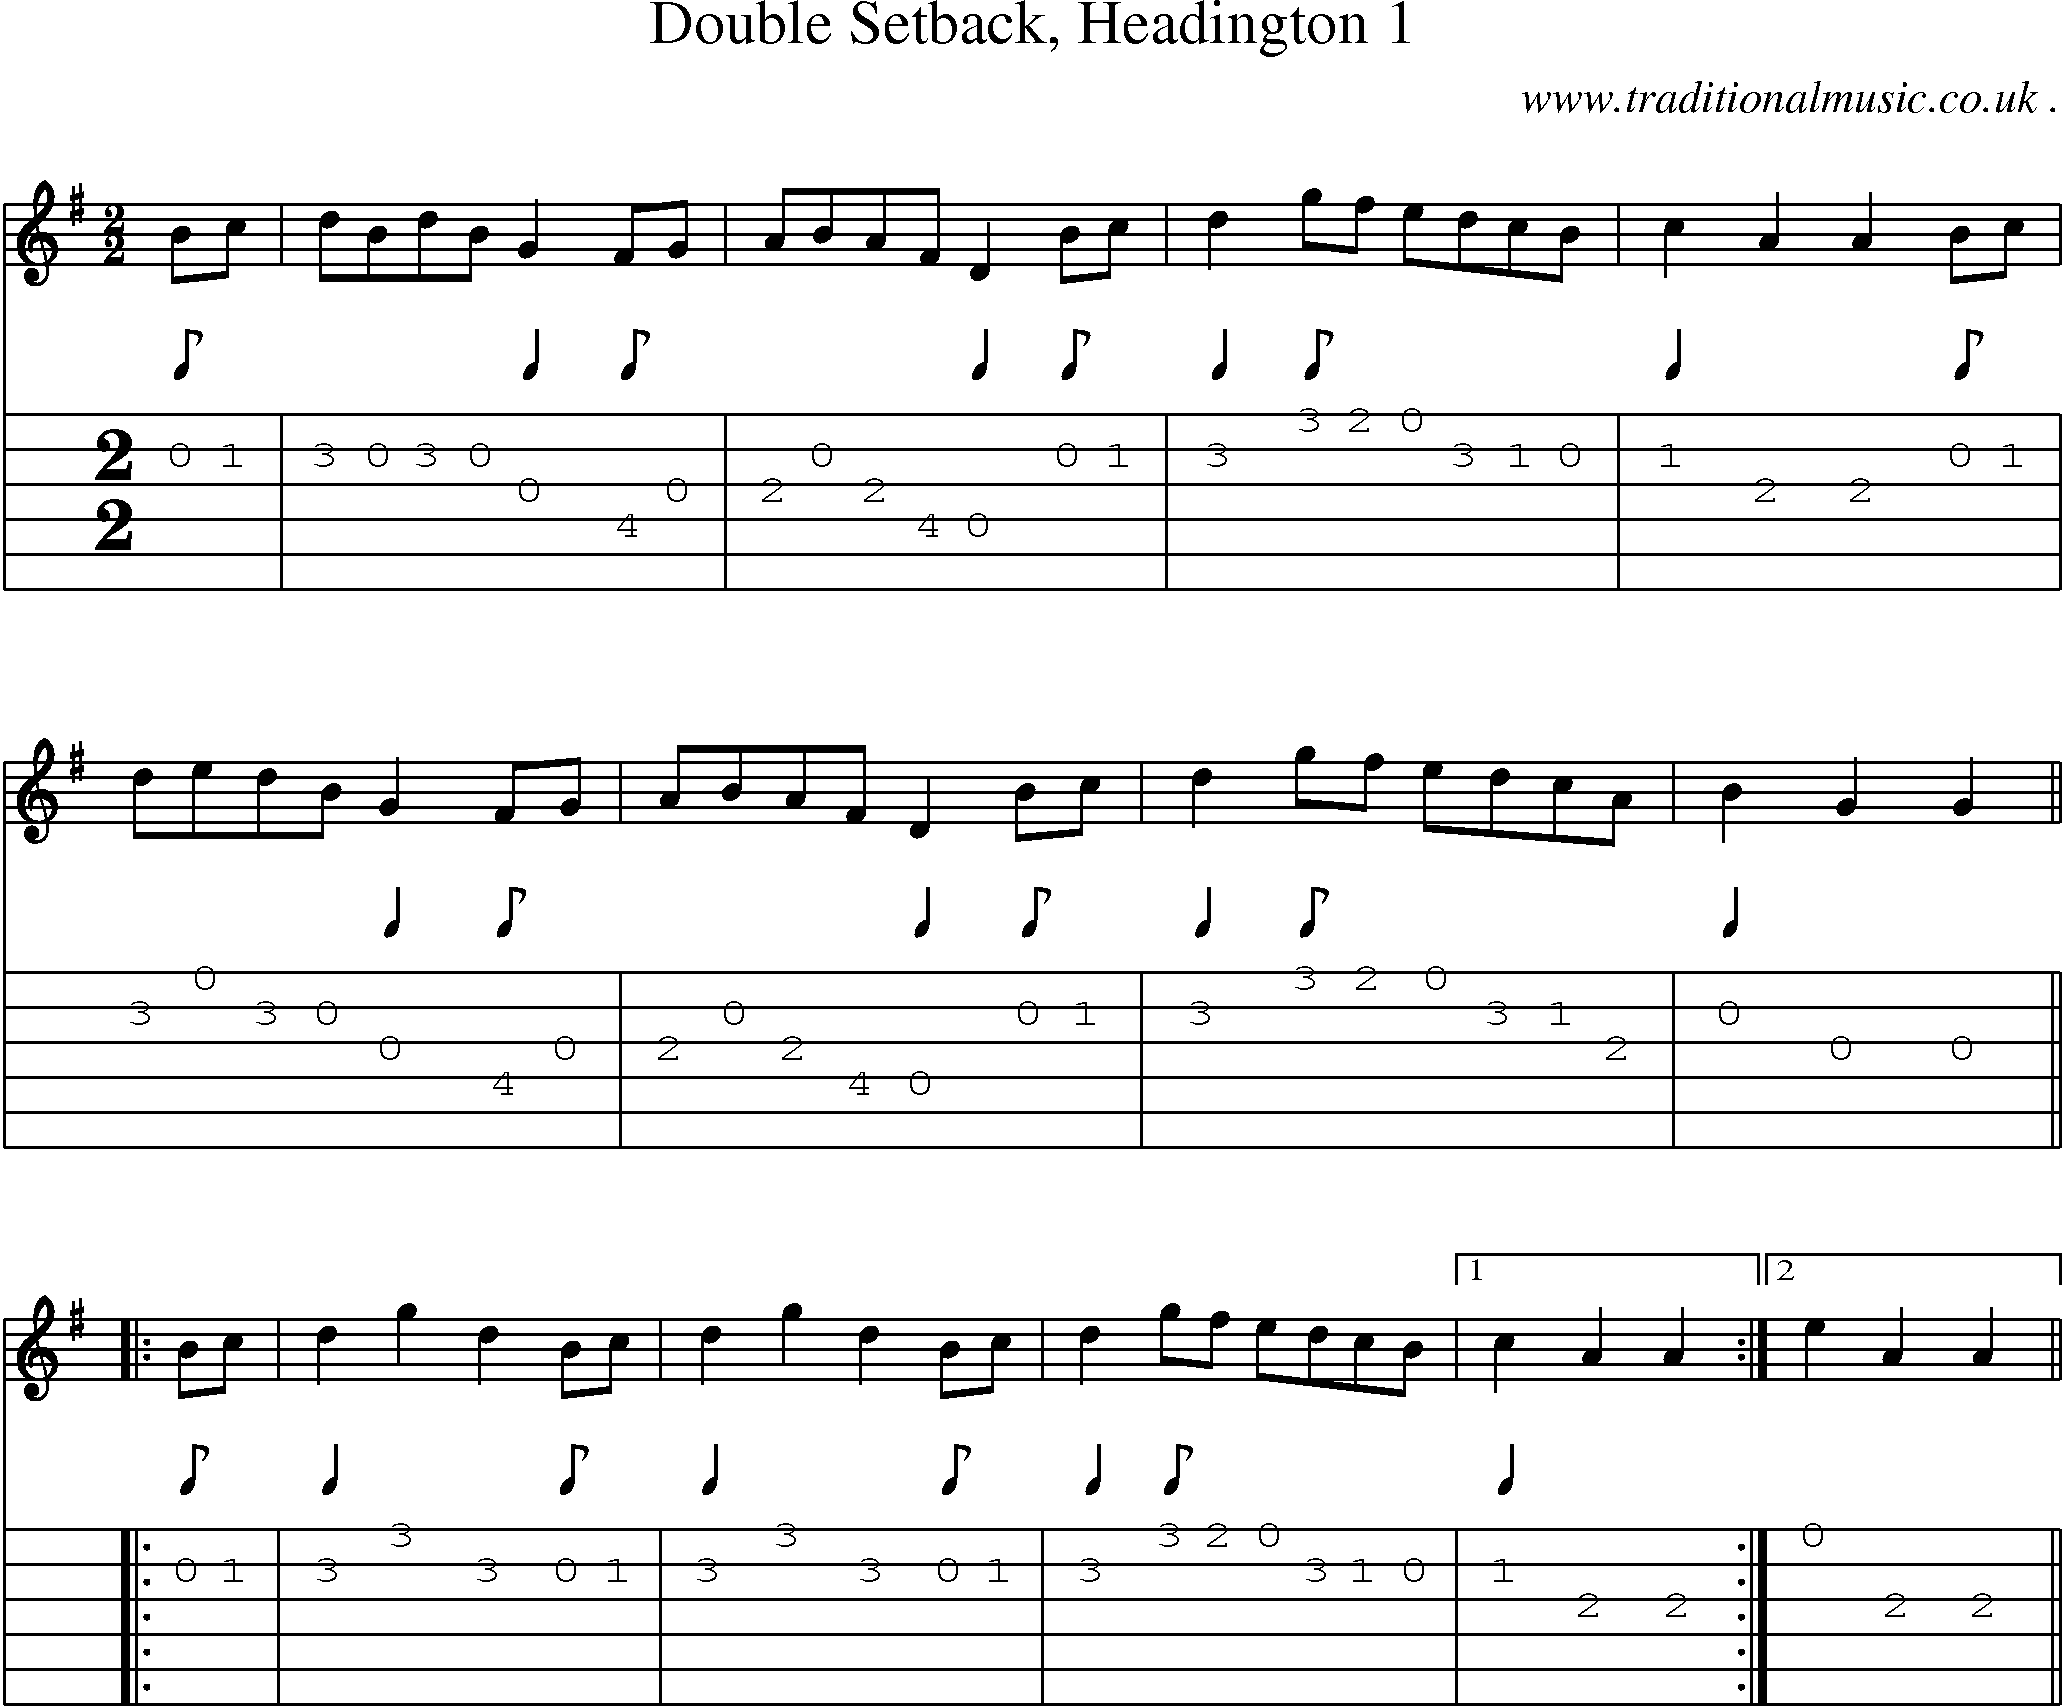 Sheet-Music and Guitar Tabs for Double Setback Headington 1